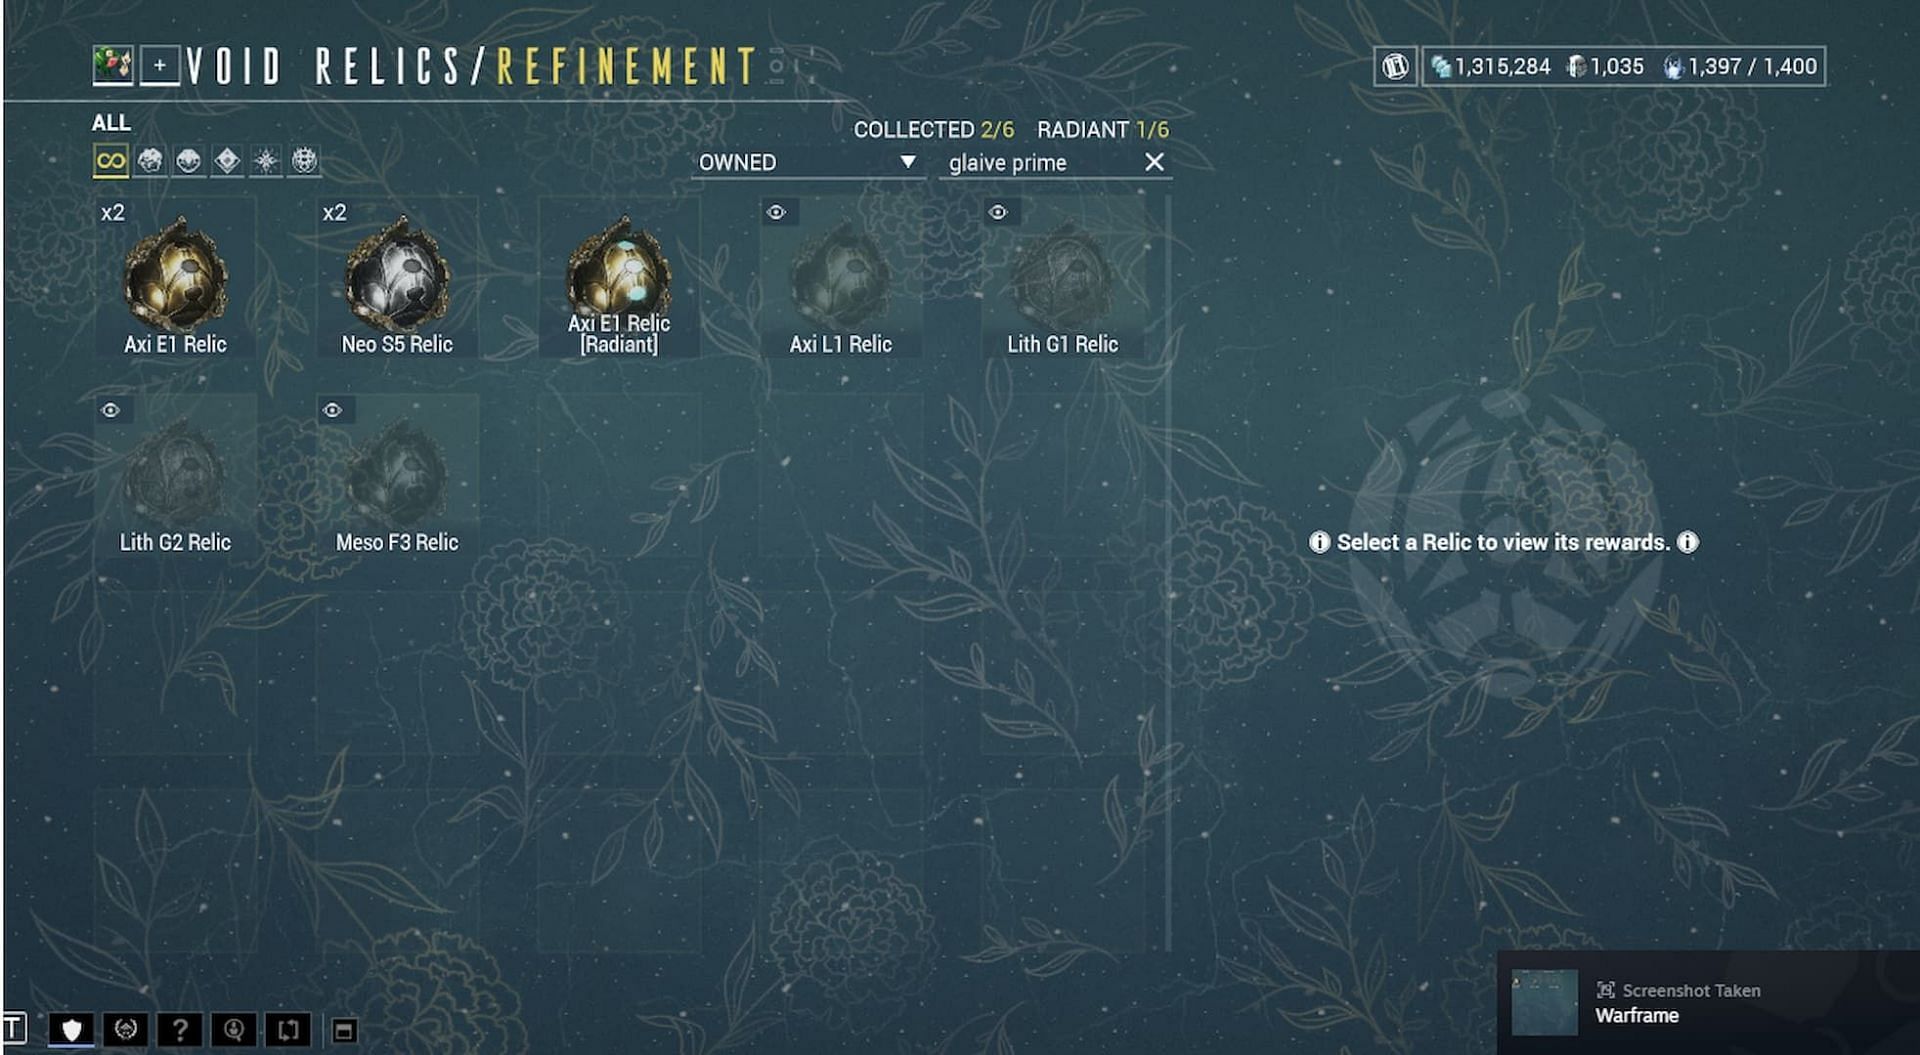 You can purchase vaulted relics from other players or from Varzia (Image via Digital Extremes)